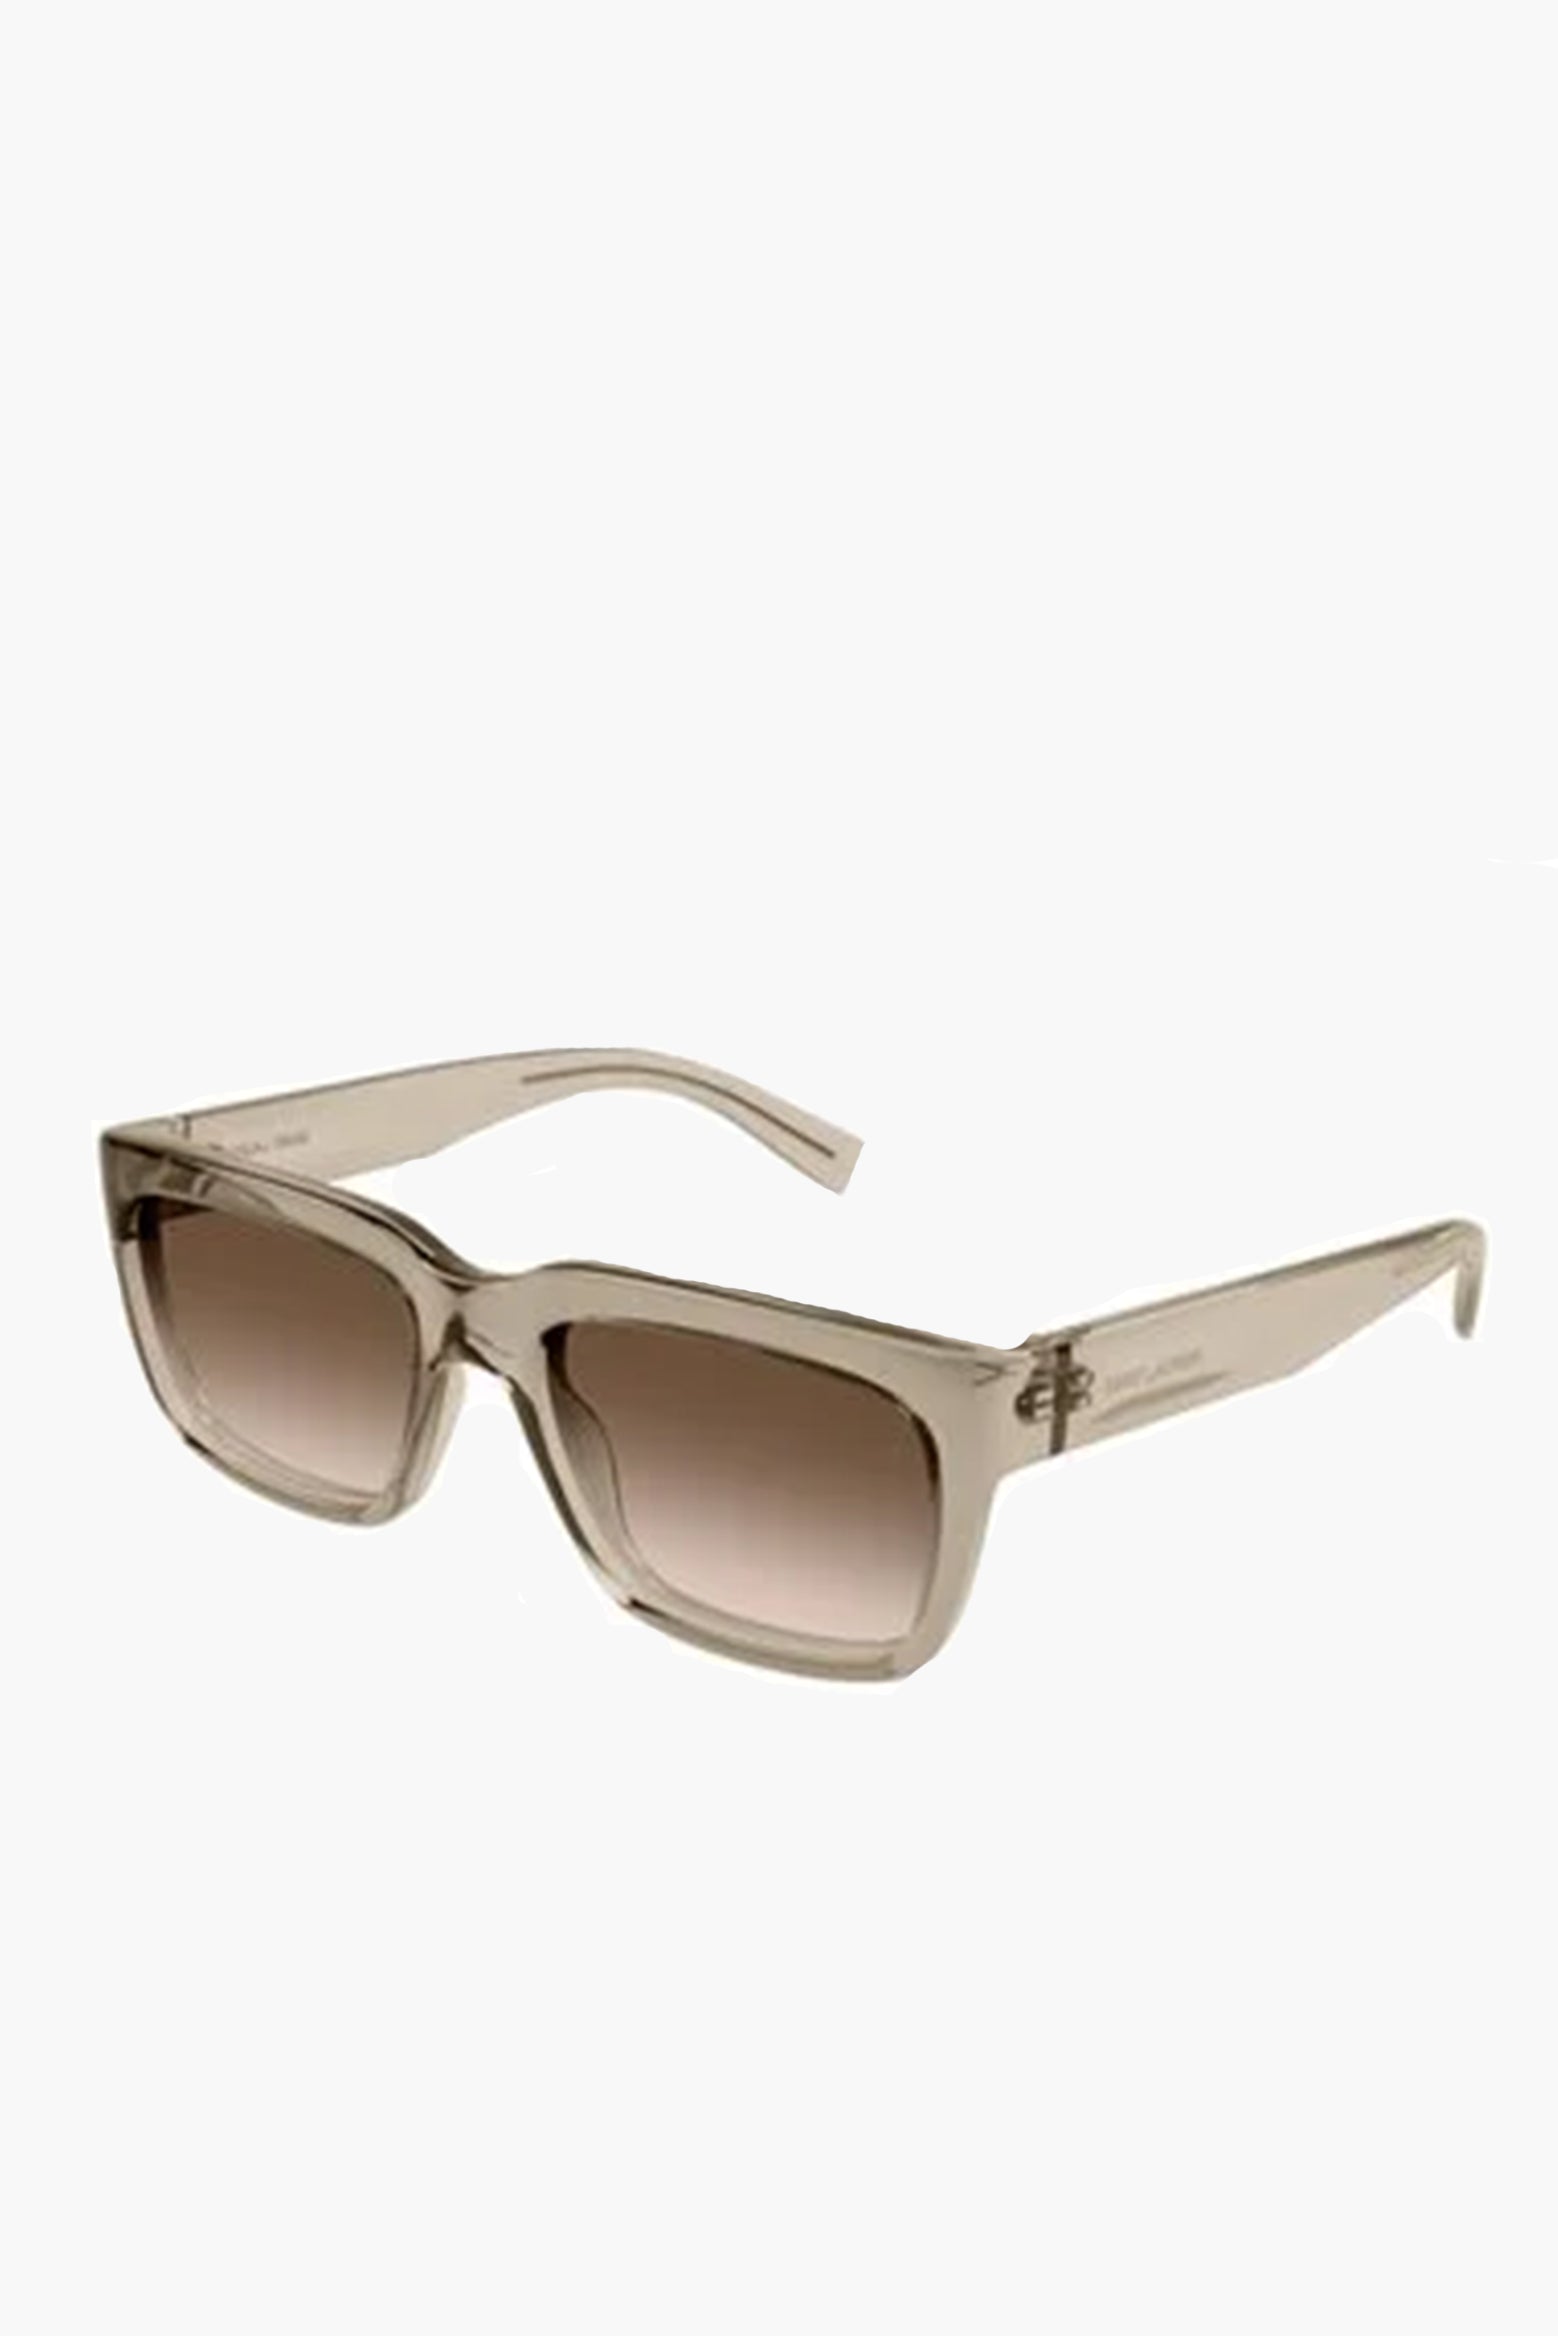 Saint Laurent Cat Eye Frame Sunglasses in Nude available at The New Trend Australia.